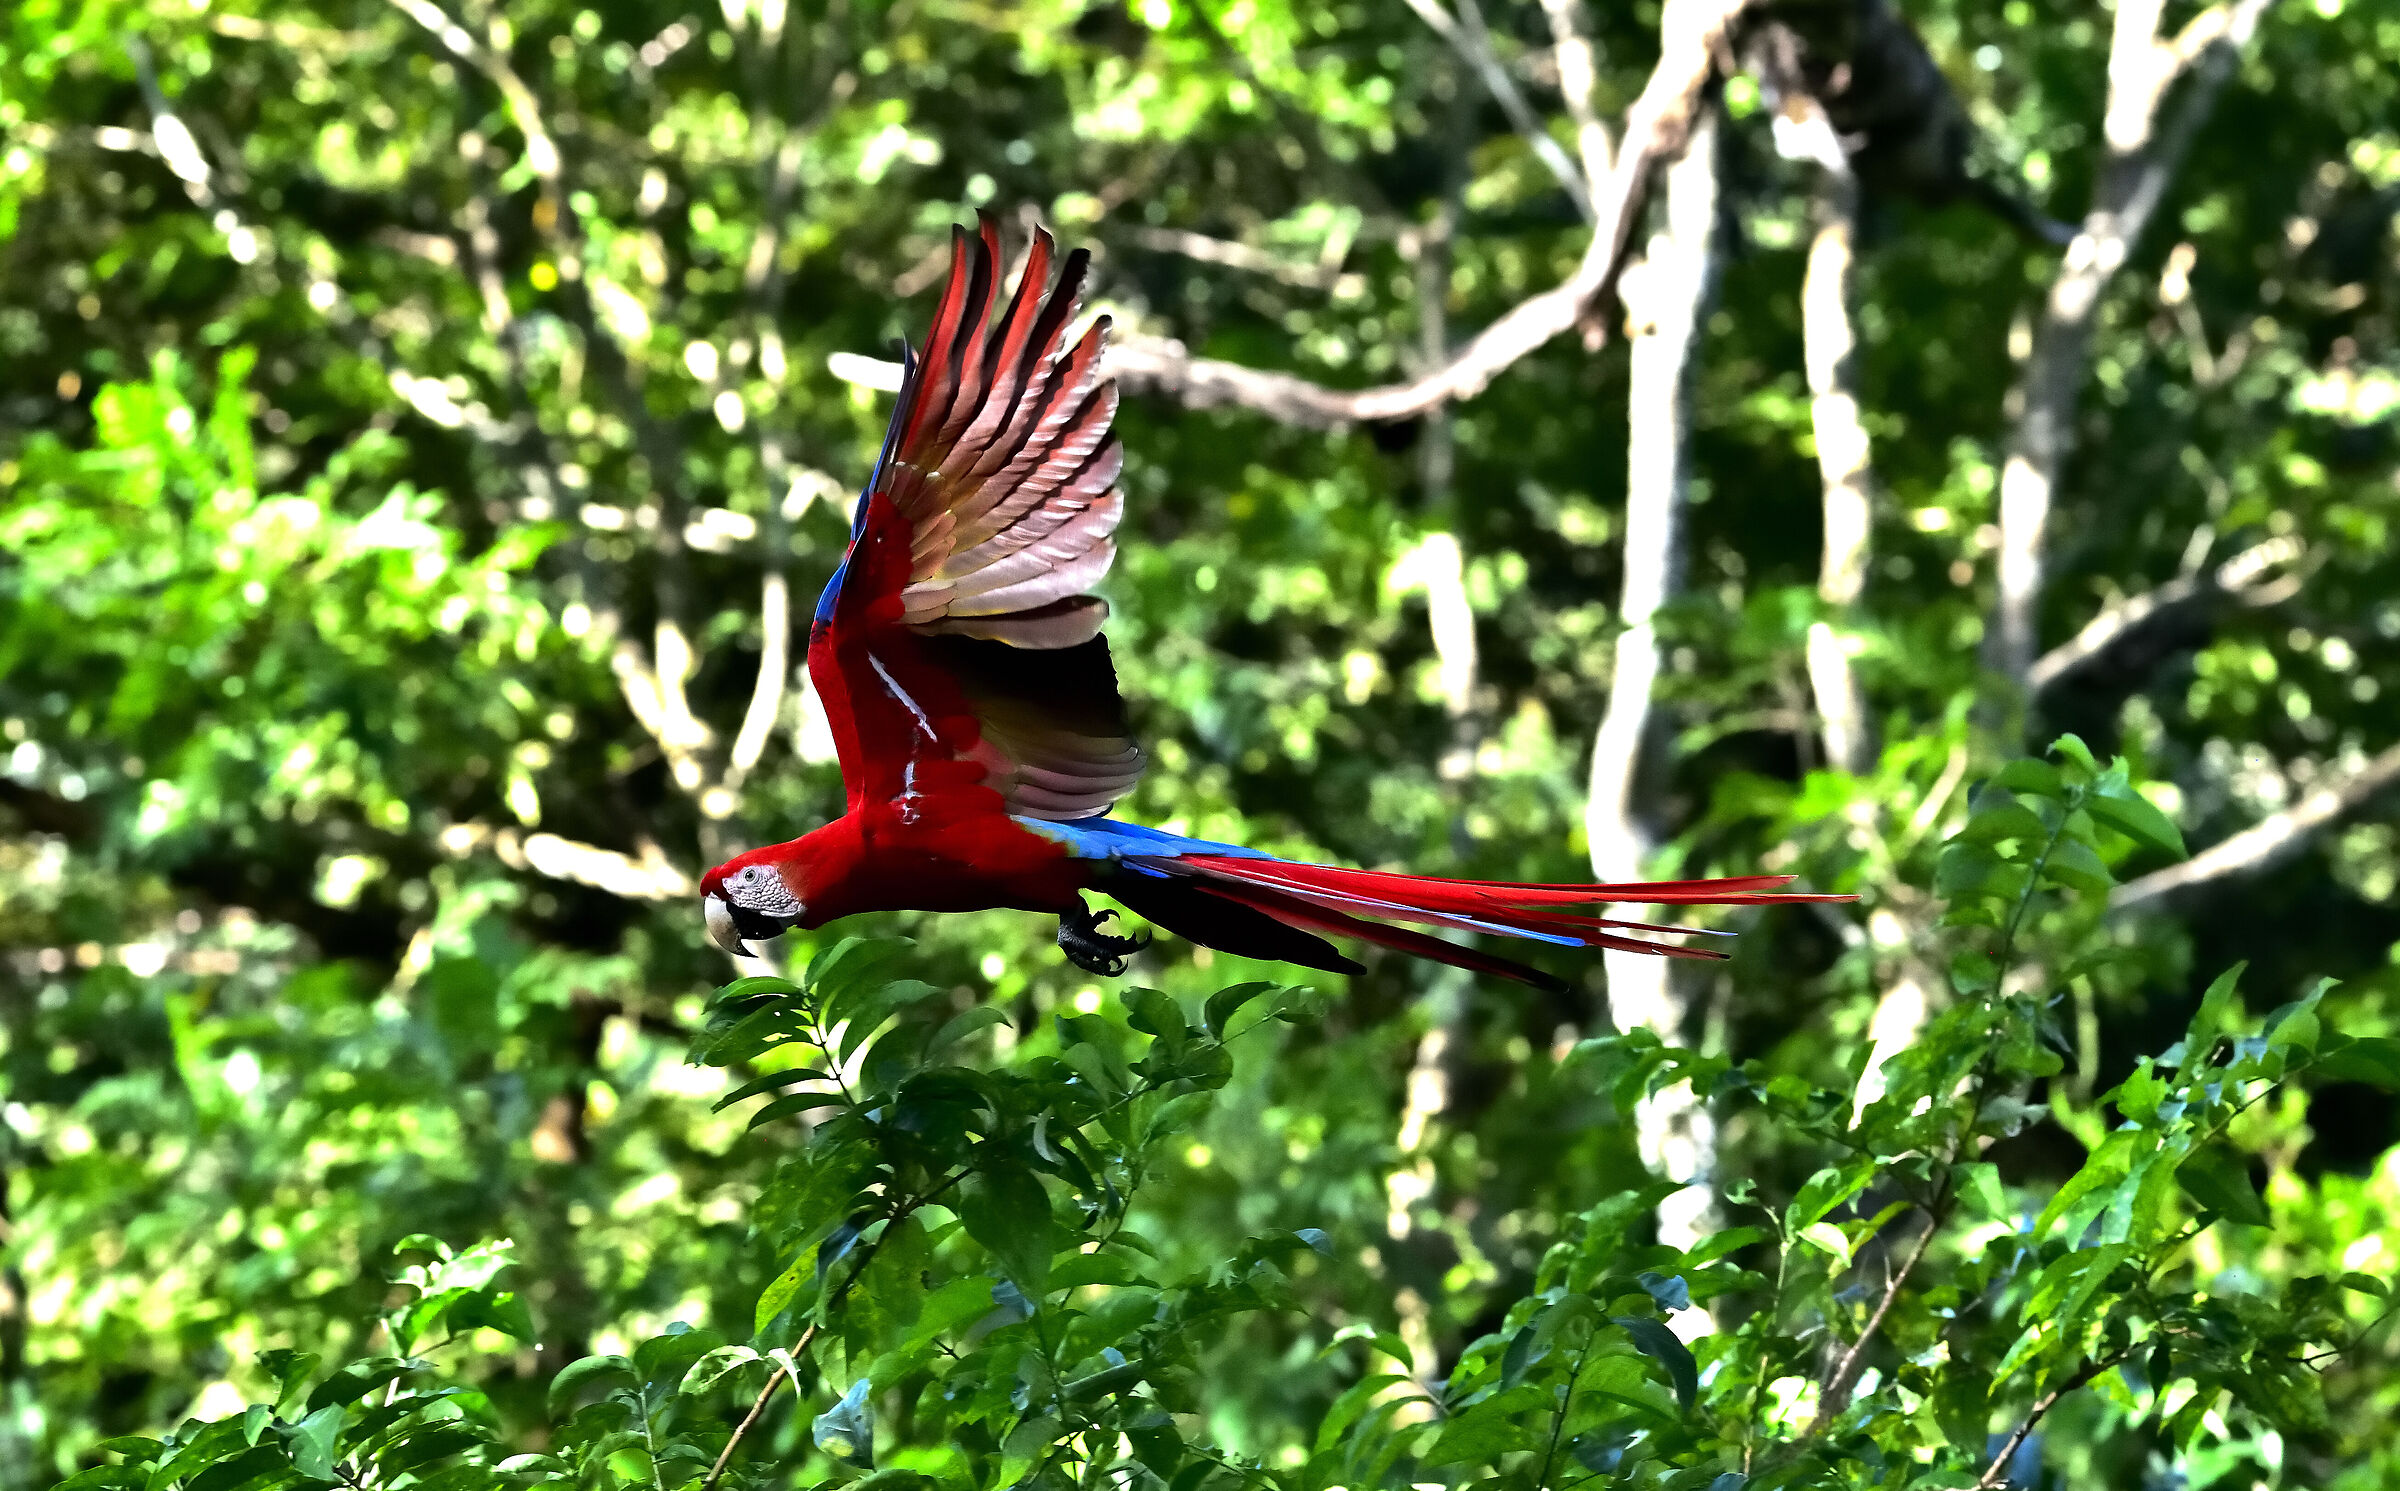 An Ara Scarlet Macaw patrolling the forest...